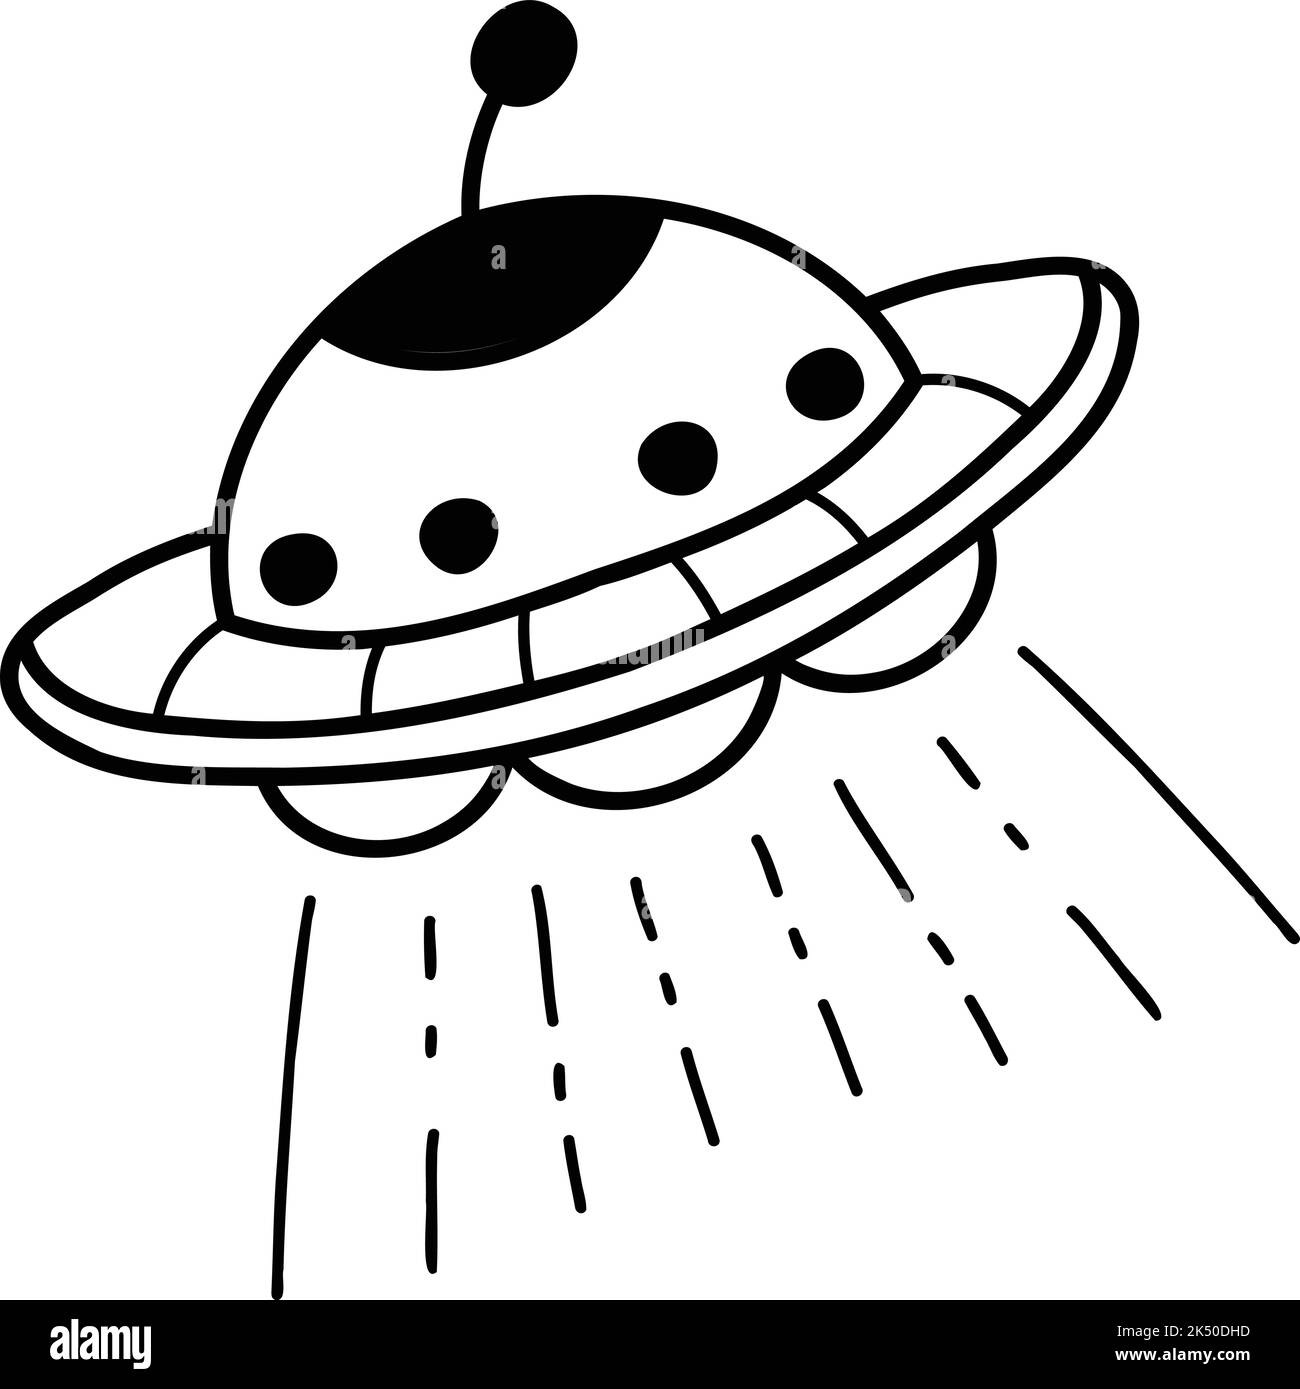 Hand Drawn cute ufo illustration isolated on background Stock Vector